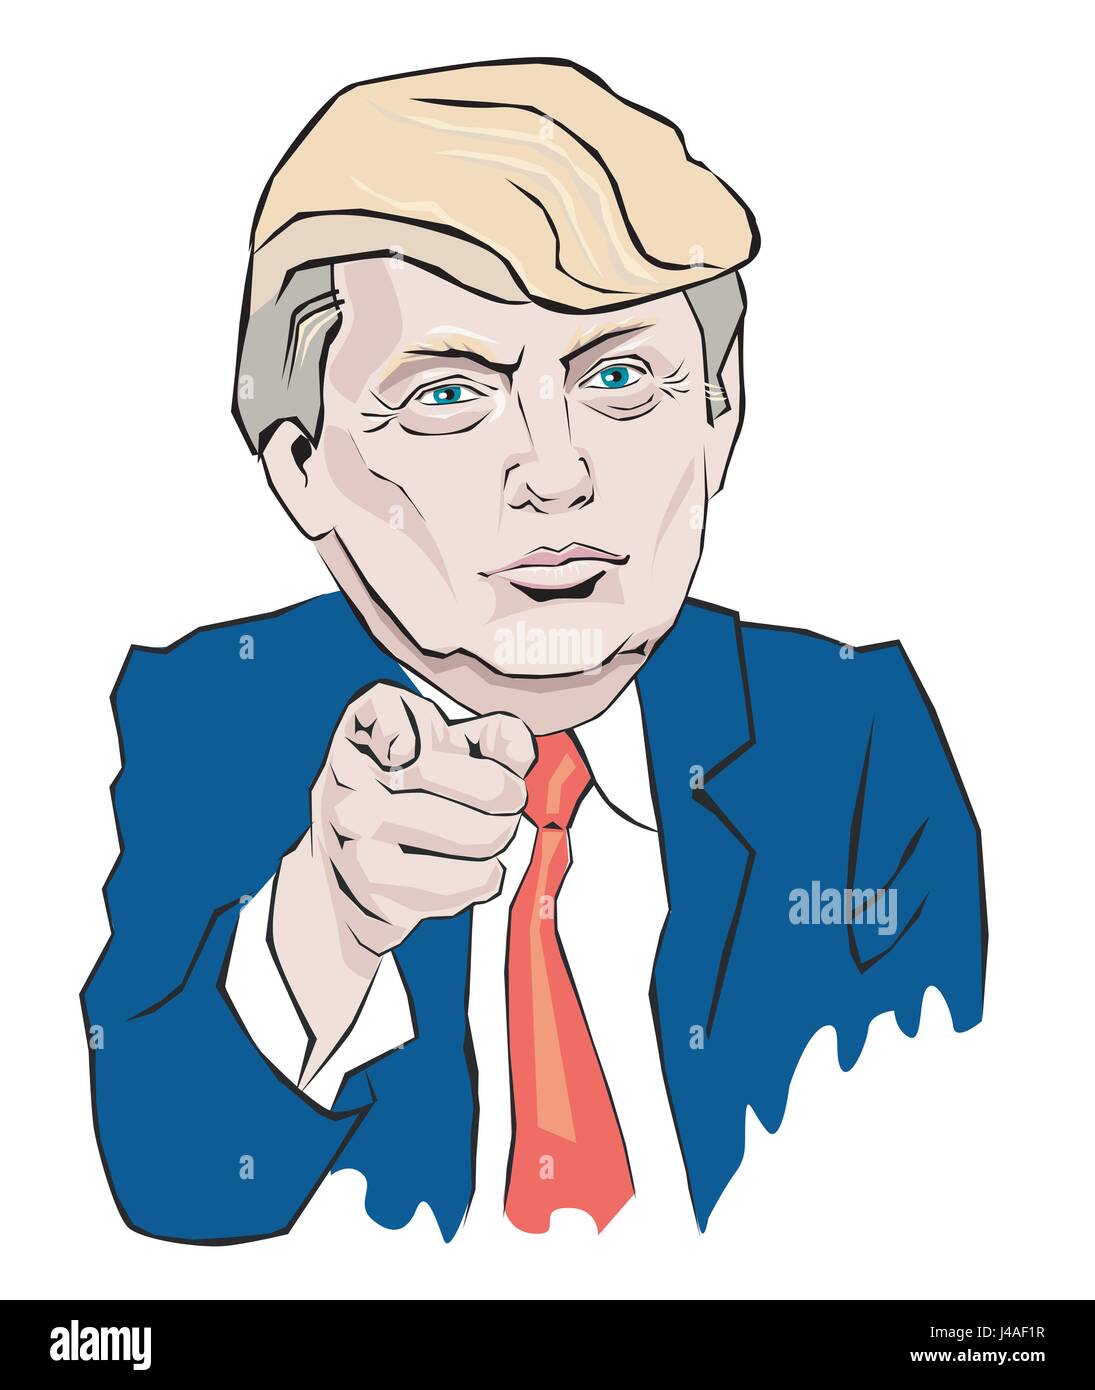 Donald Trump In a red tie points with your finger Stock Vector